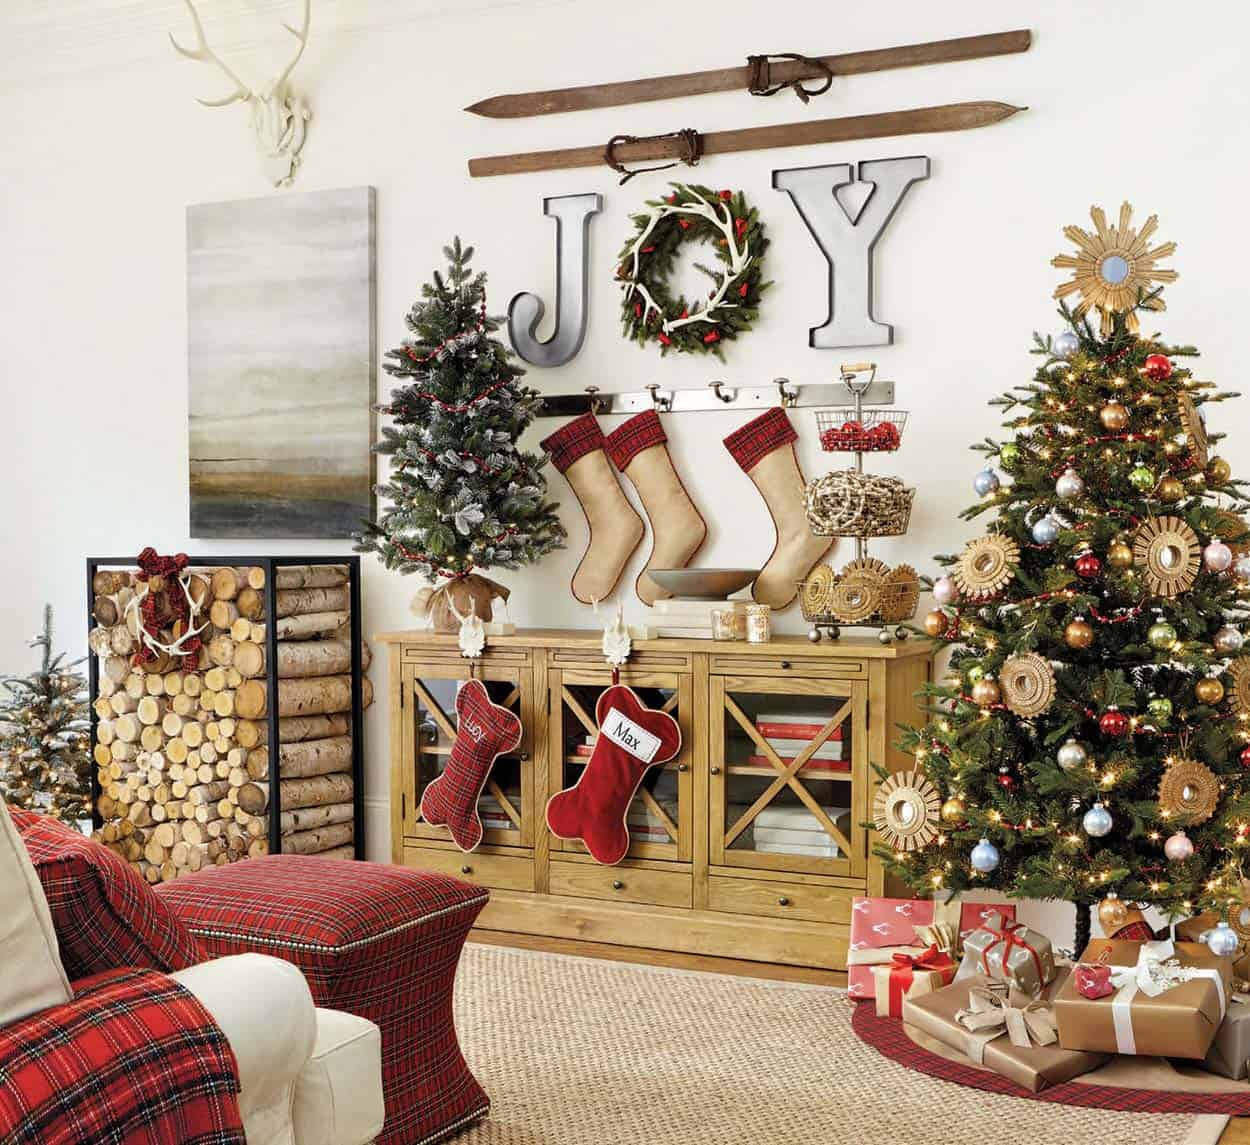 Christmas Floor Decorations
 40 Fabulous Rustic Country Christmas Decorating Ideas